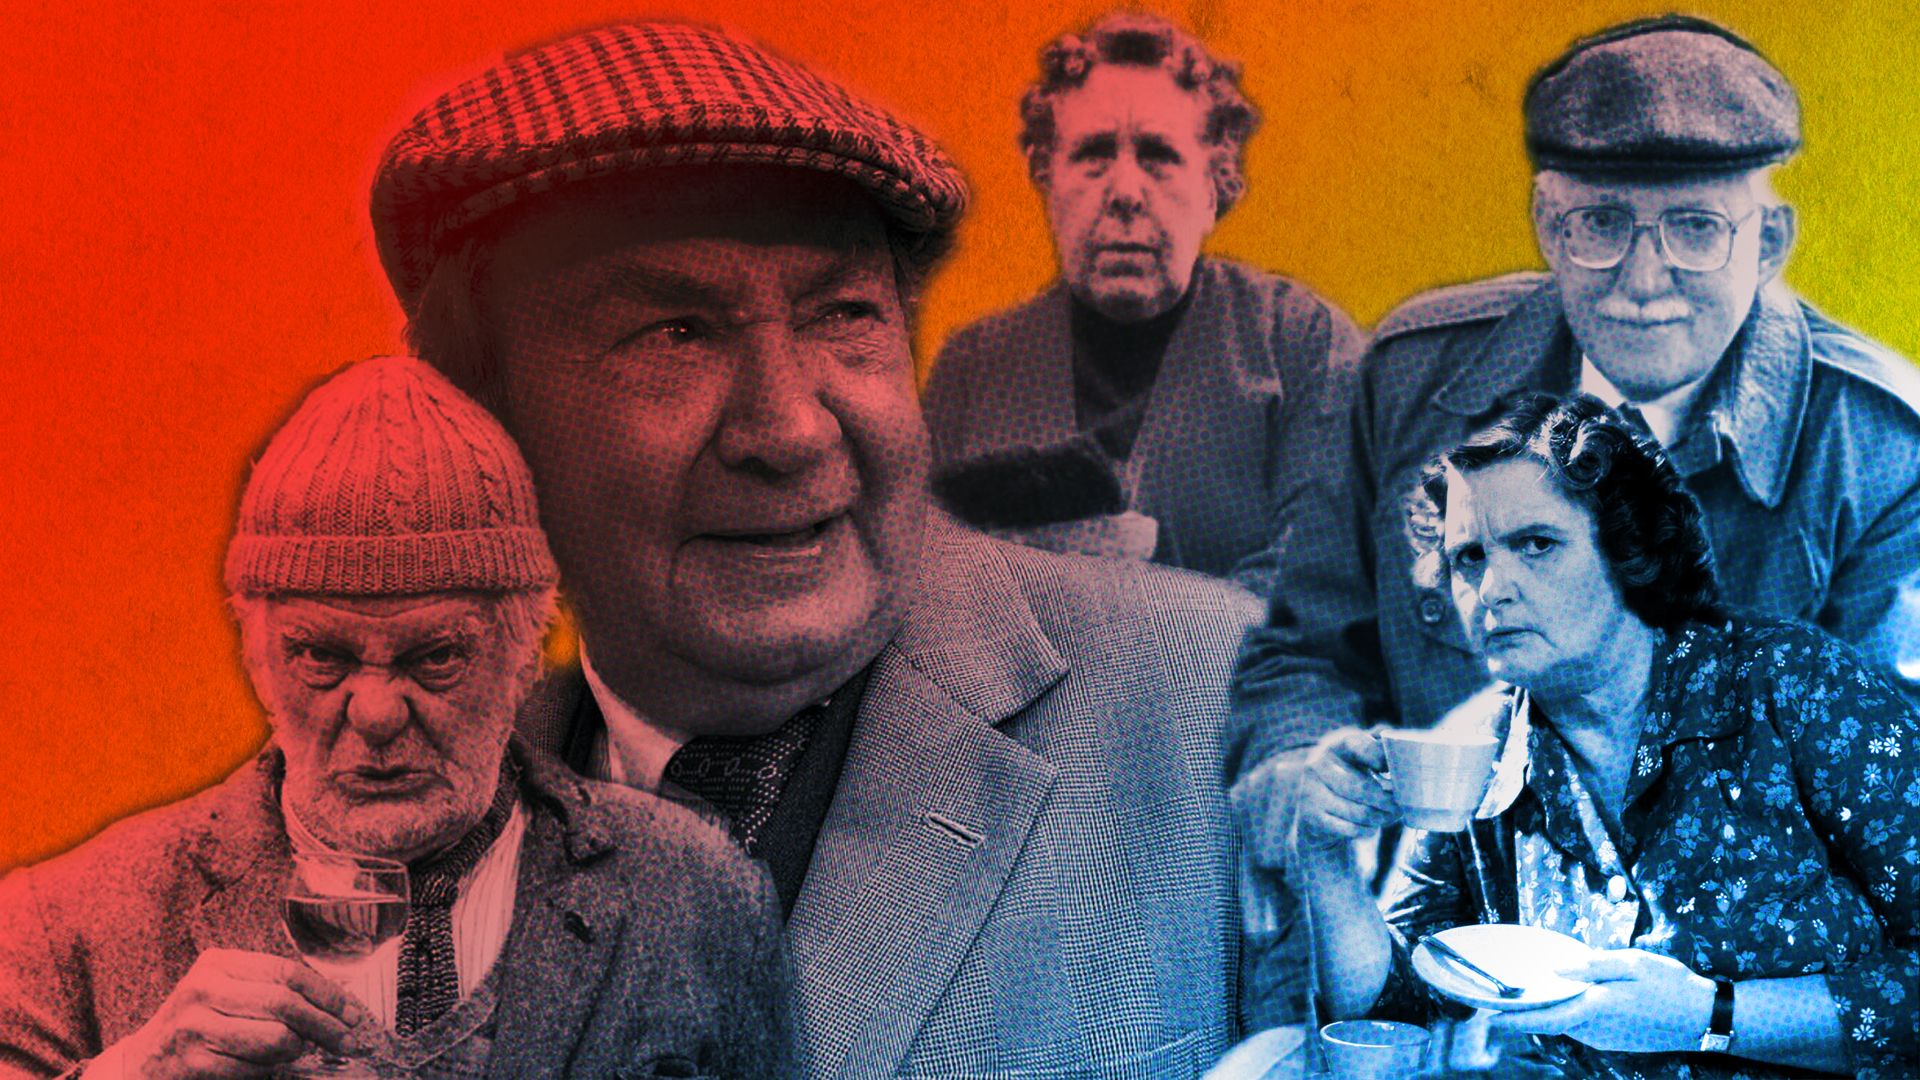 The Spielbergian Quality Of Last Of The Summer Wine